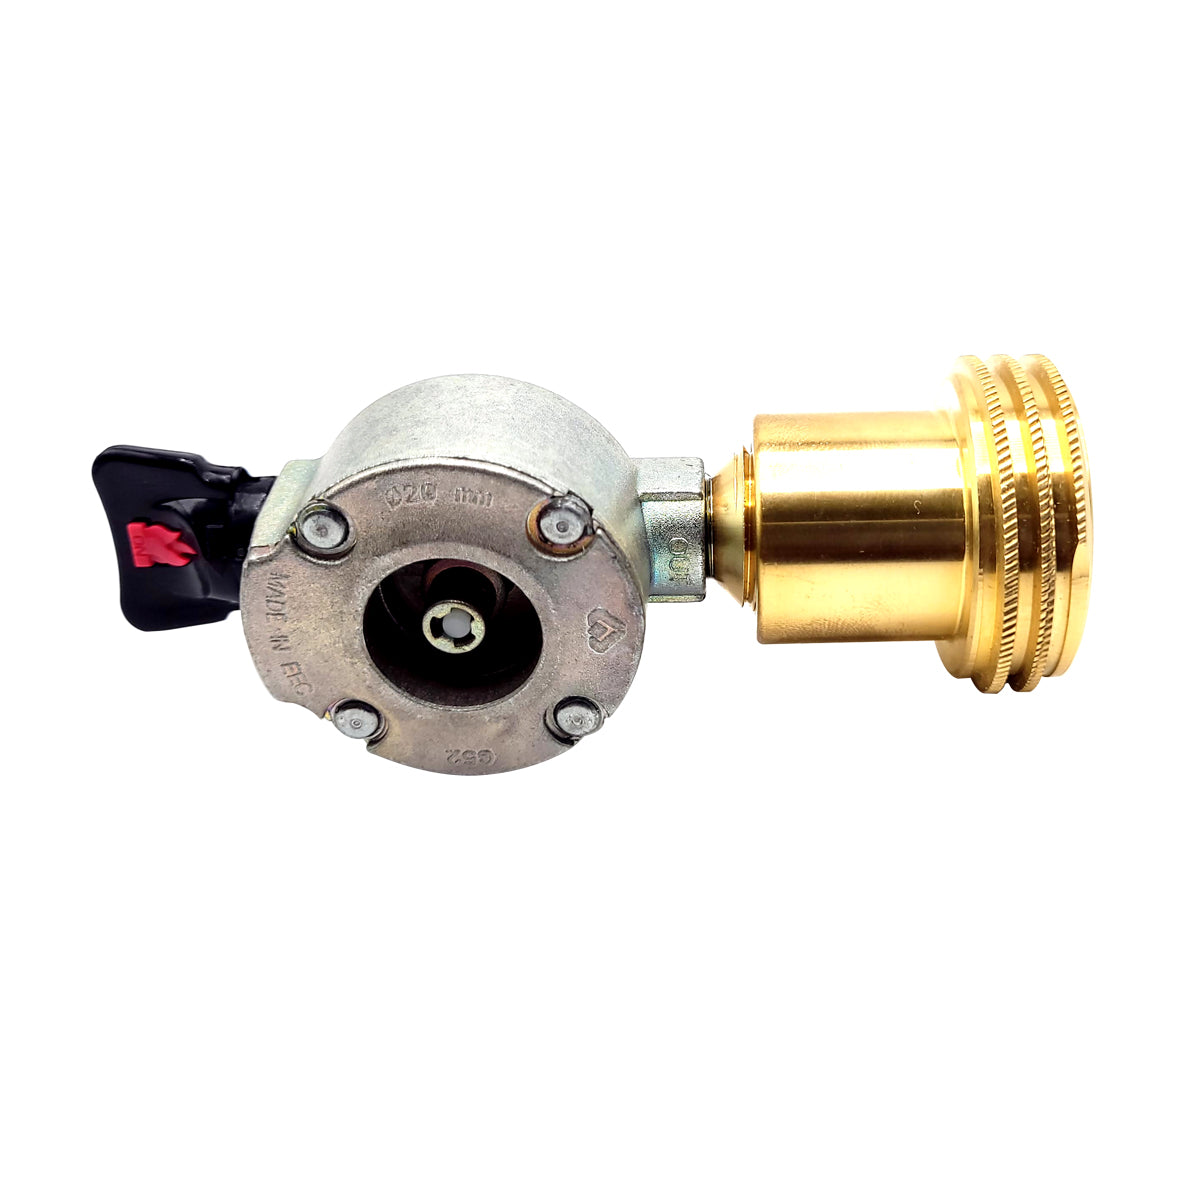 Adapter to connect any type of regulator to any European gas cylinder  SK102903